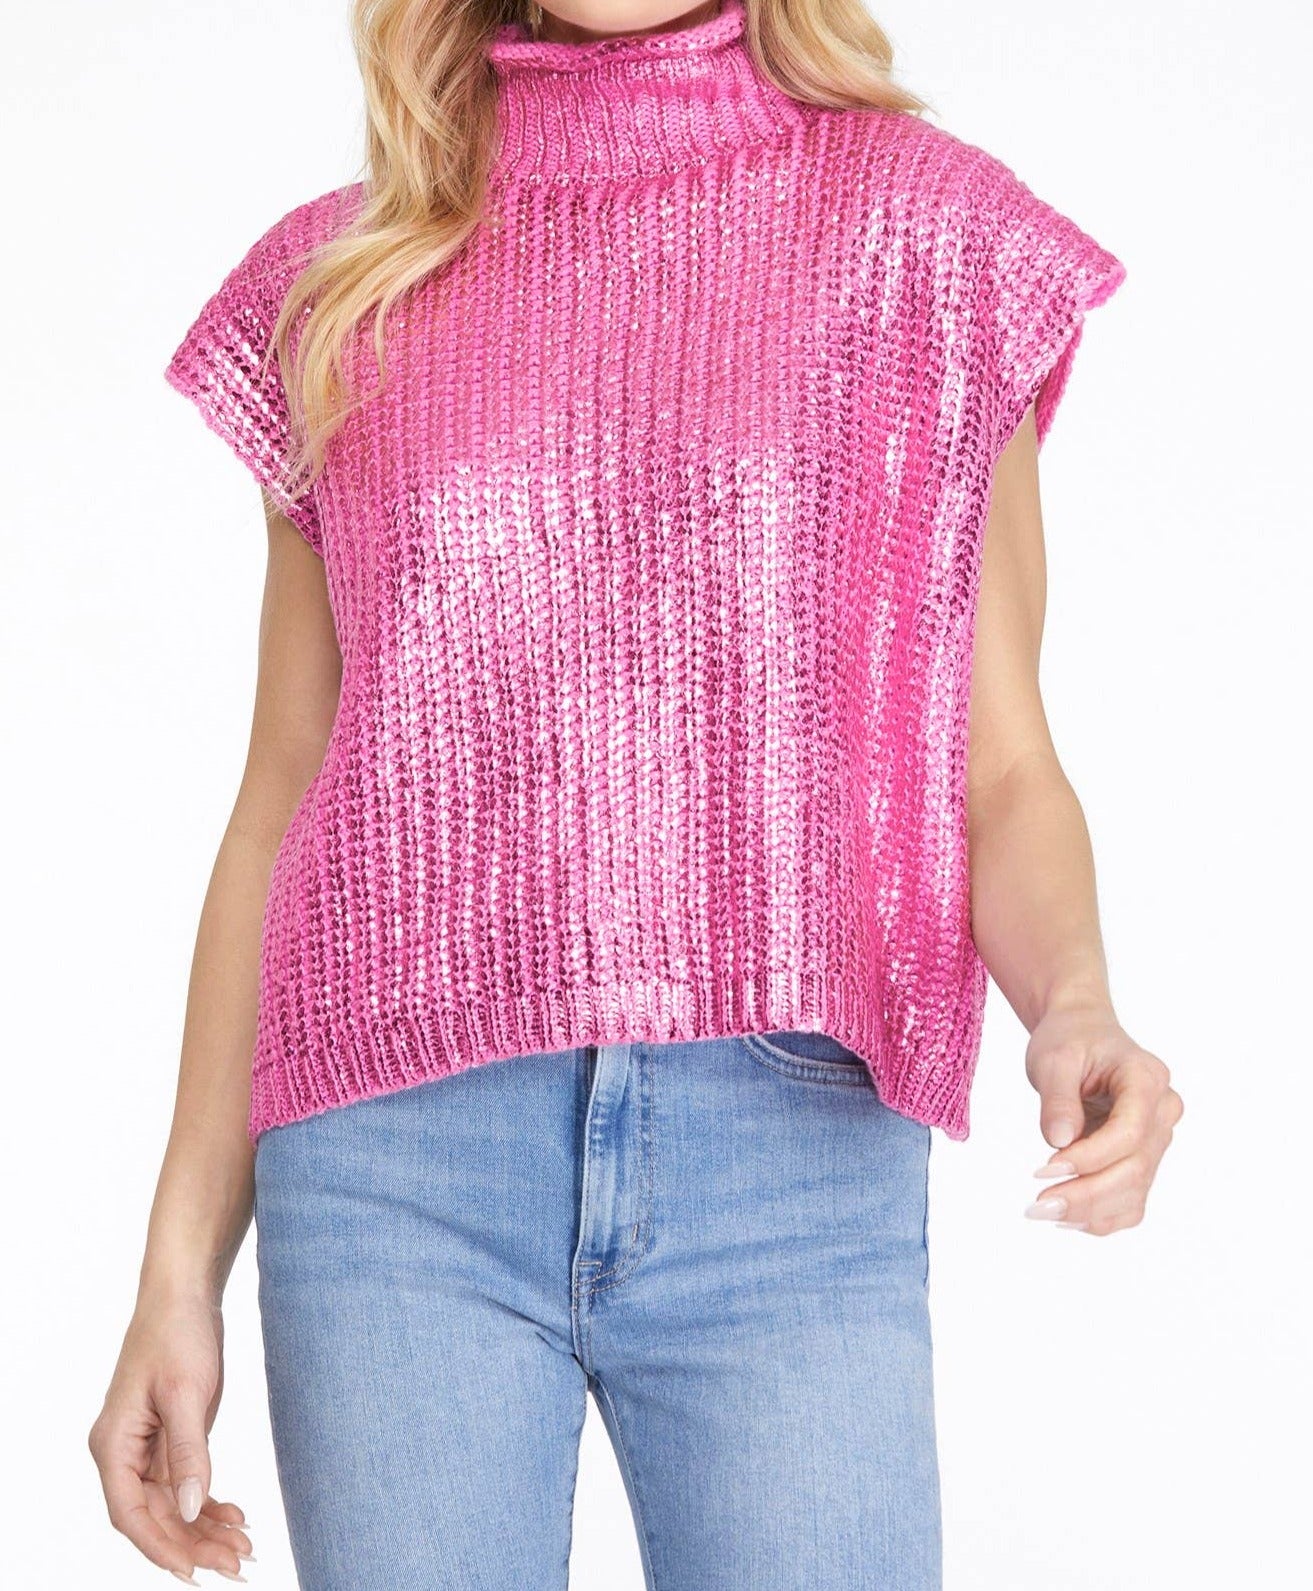 Pink Foiled Sweater